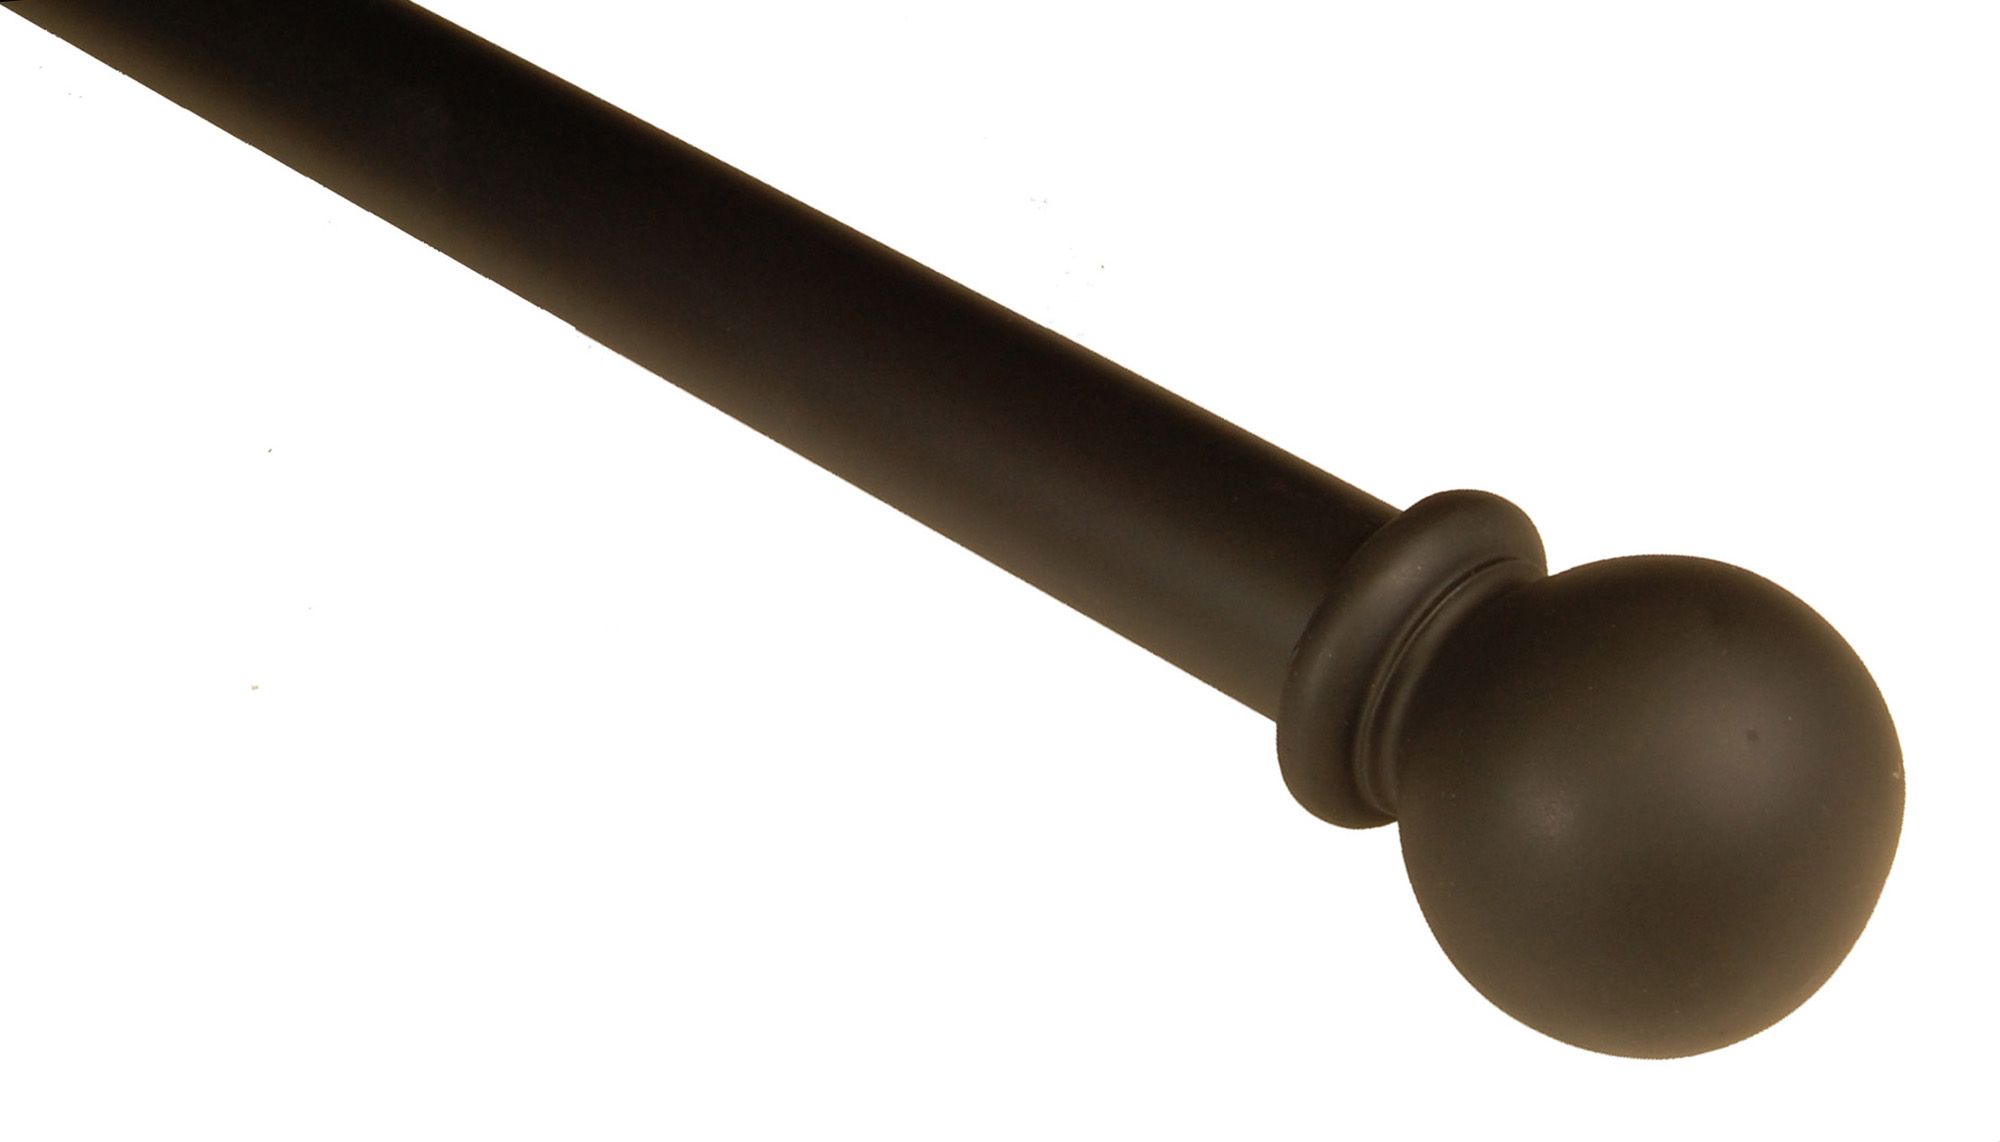 BCL Classic Ball Curtain Rod, Black Finish, 28-inch to 48-inch